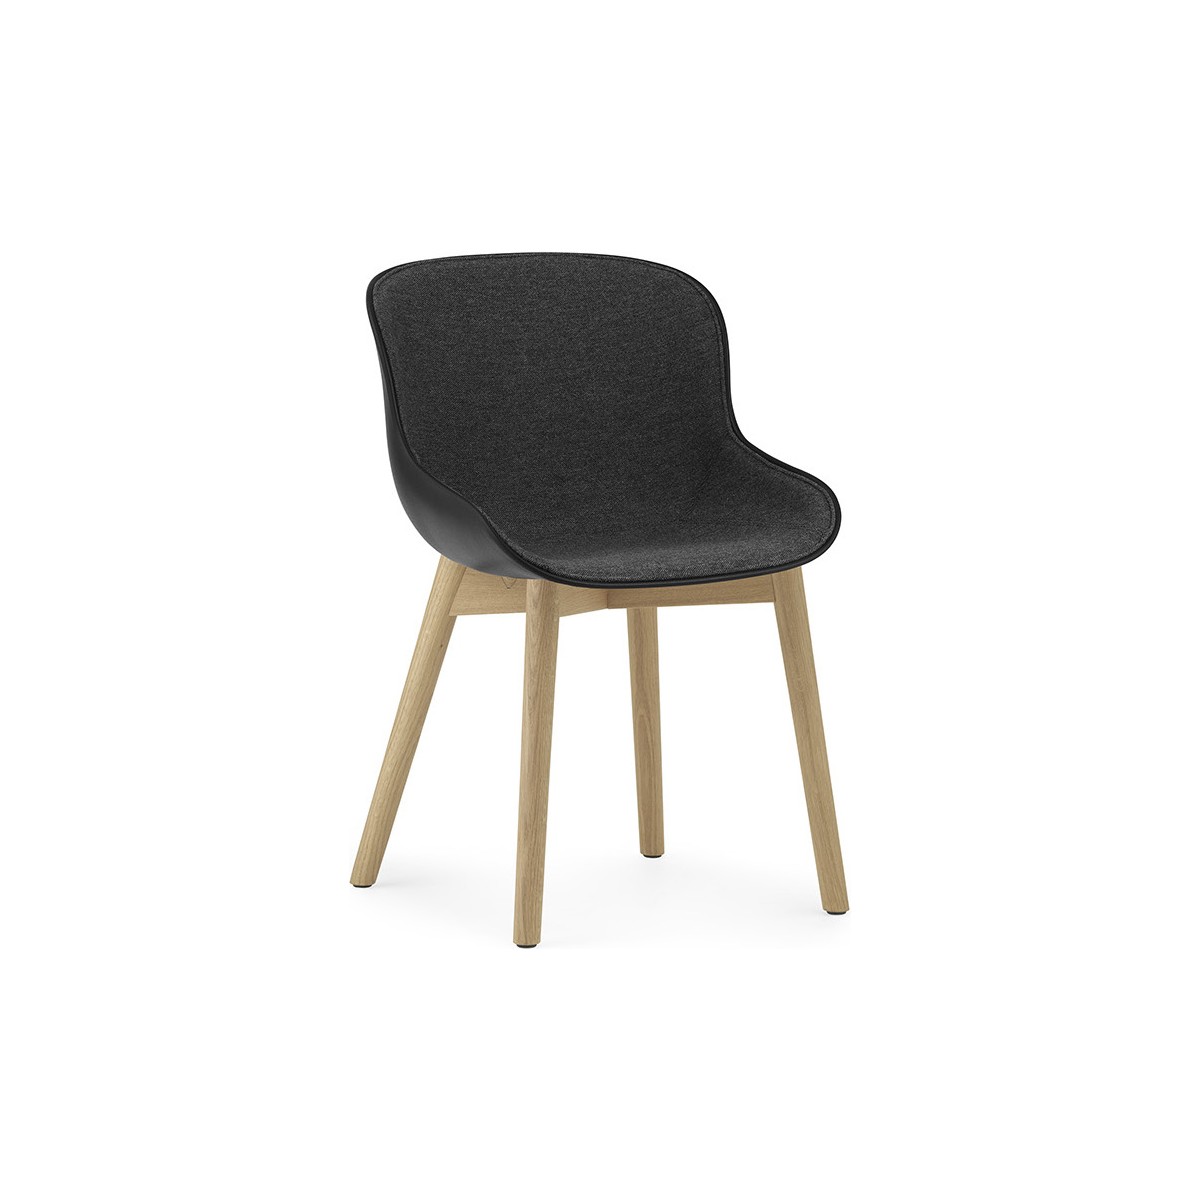 black / Main Line Flax 16 / oak – front upholstered –  Hyg Chair